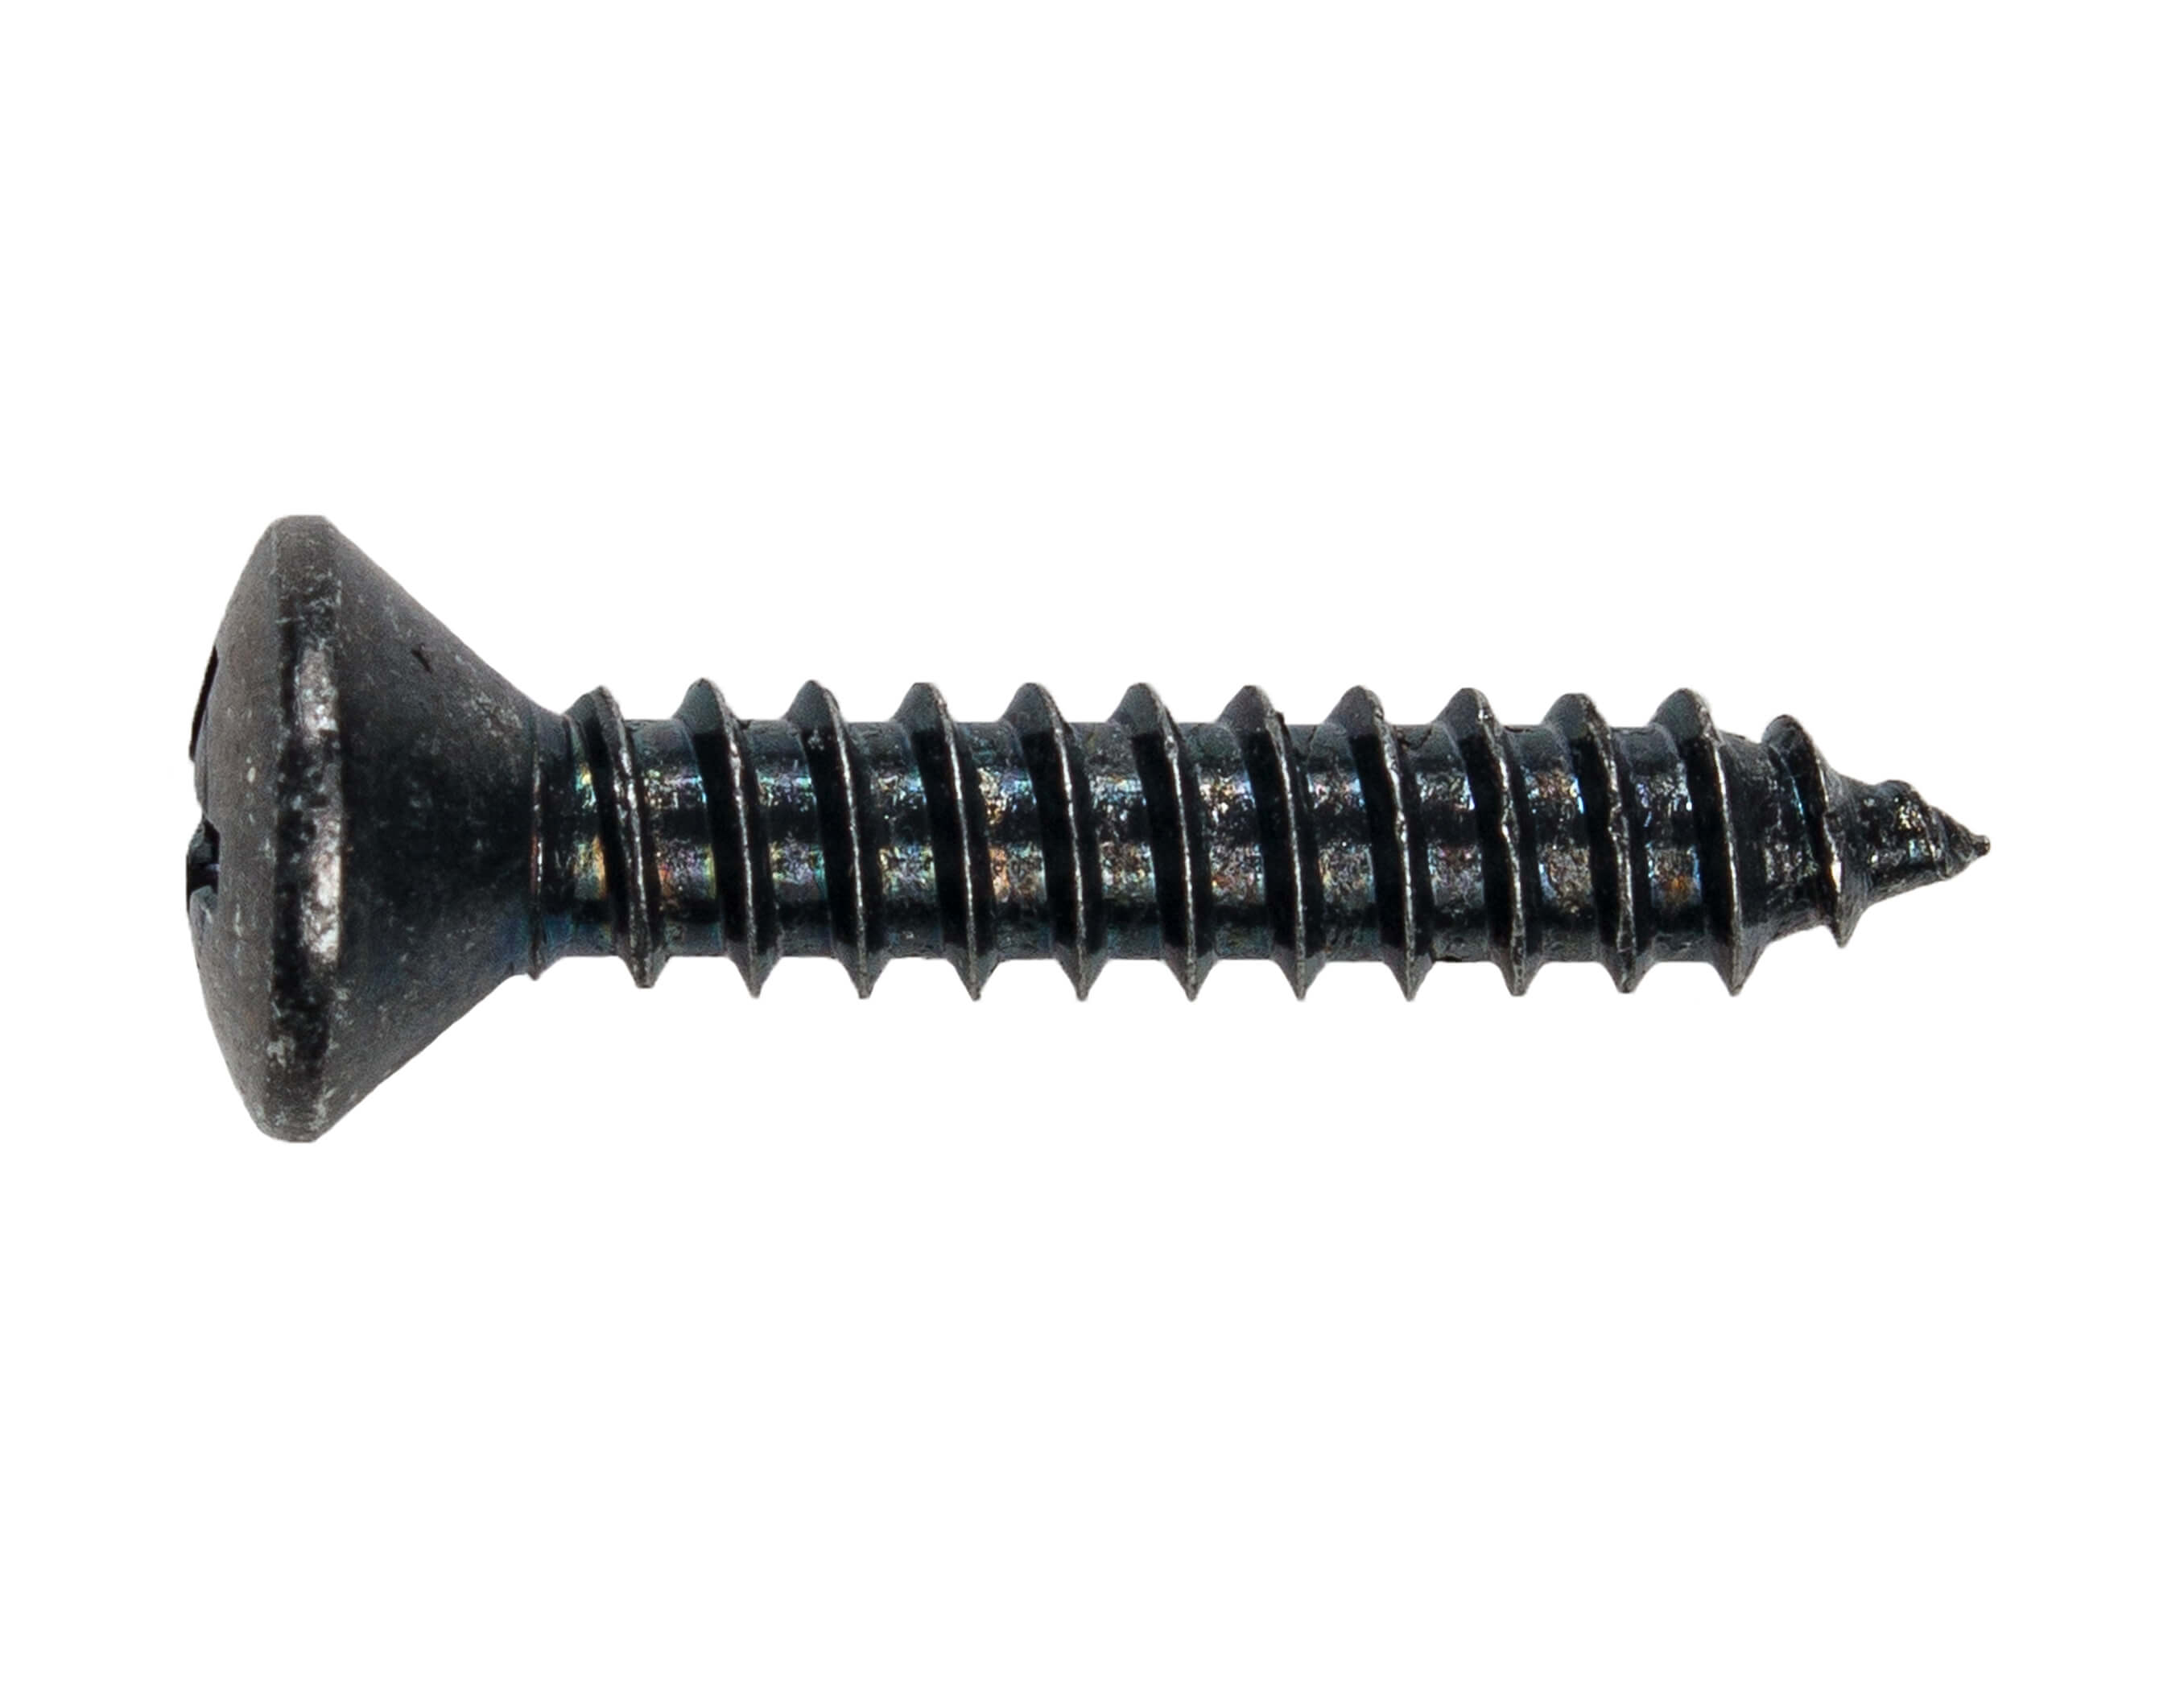 4.2X25 SMS (TAPPING) SCREW OVAL PH BLK DIN7983